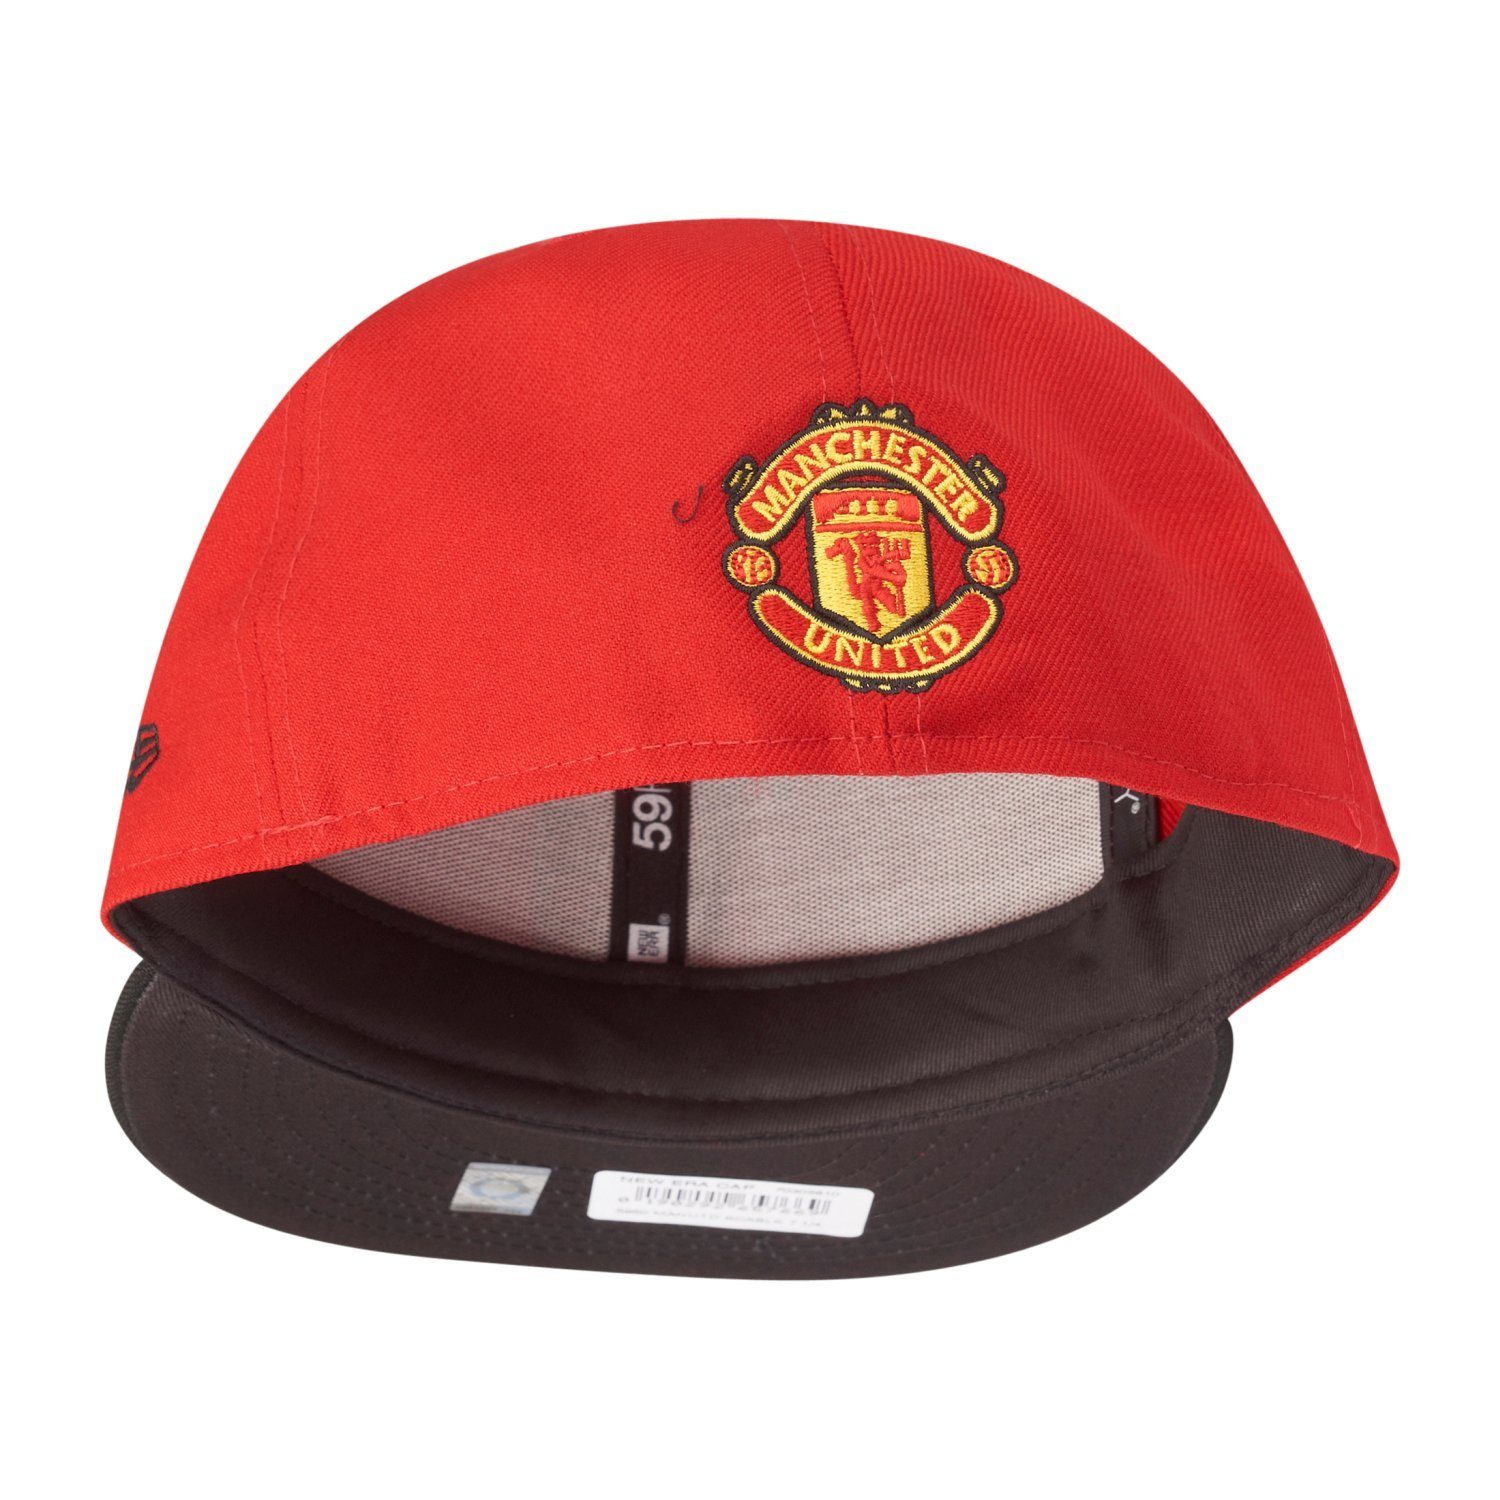 Fitted Cap DEVIL Era United 59Fifty New Manchester